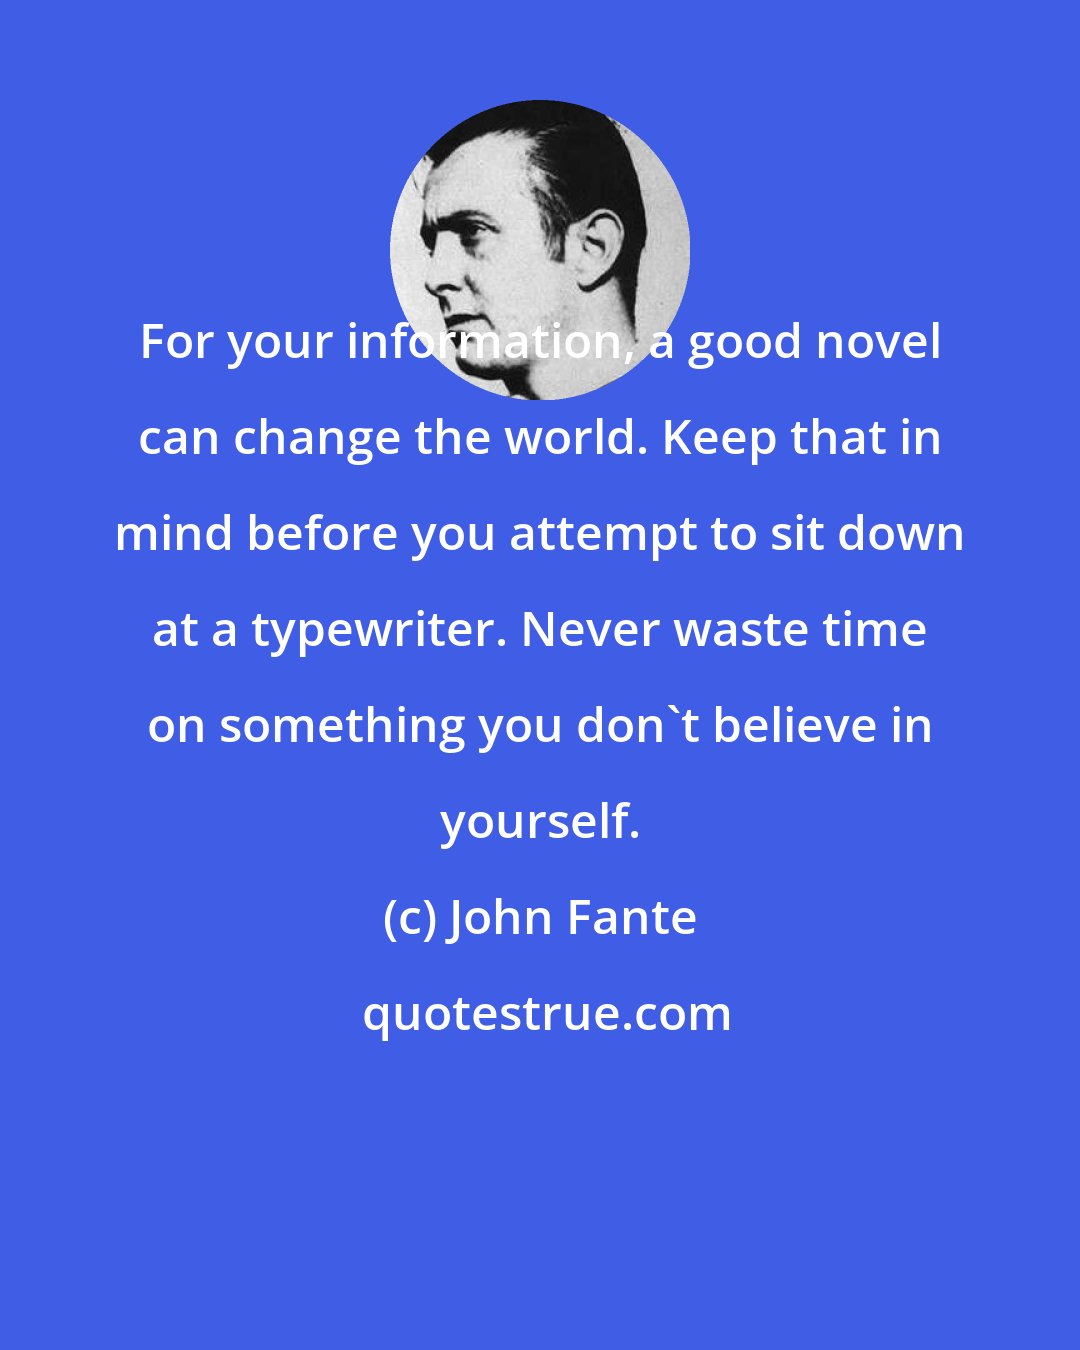 John Fante: For your information, a good novel can change the world. Keep that in mind before you attempt to sit down at a typewriter. Never waste time on something you don't believe in yourself.